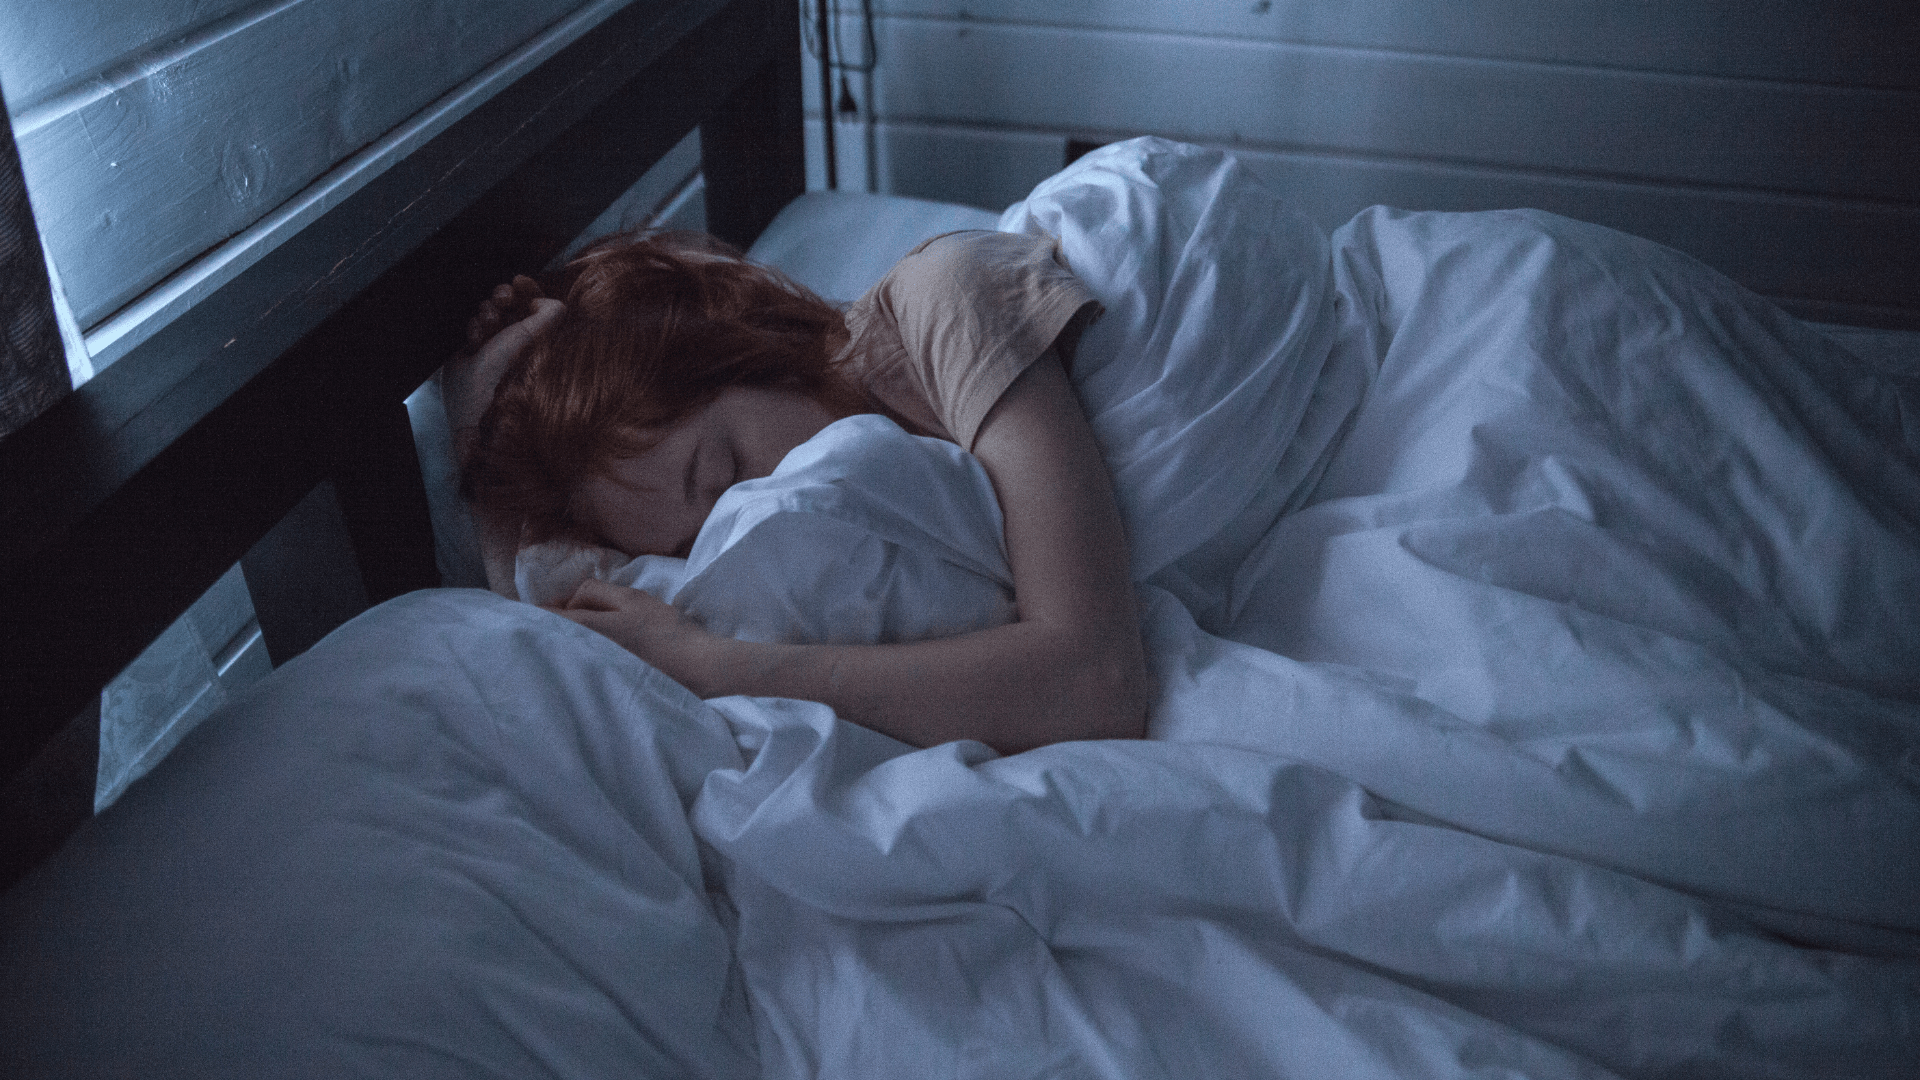 A woman curled up in bed.